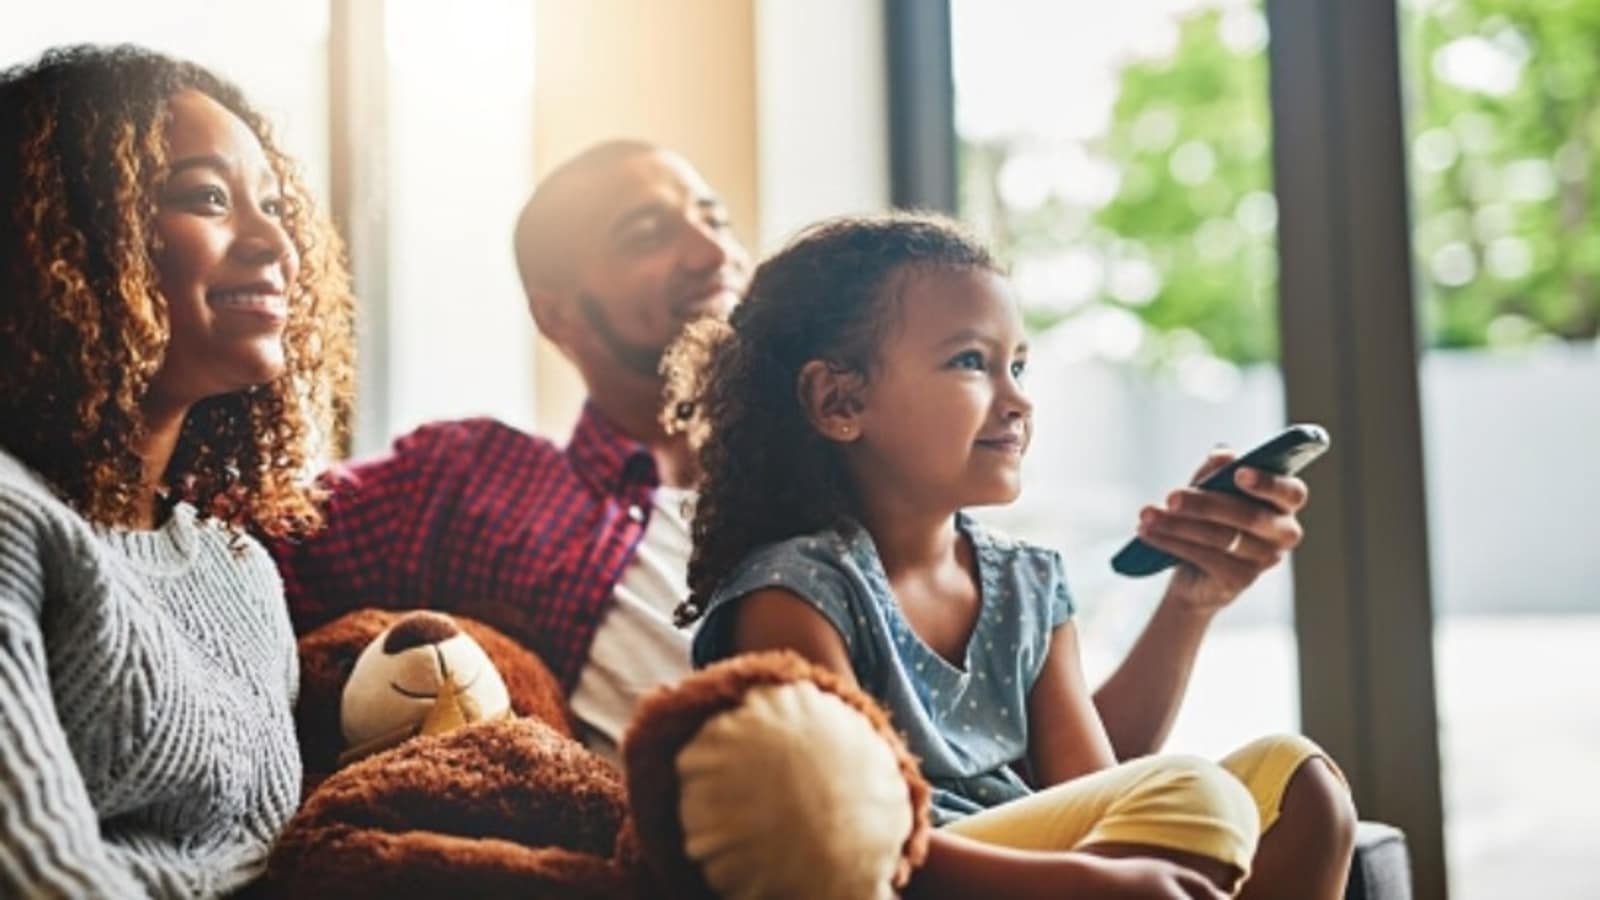 Watching TV With Children Can Help Improve Their Development, Finds Study